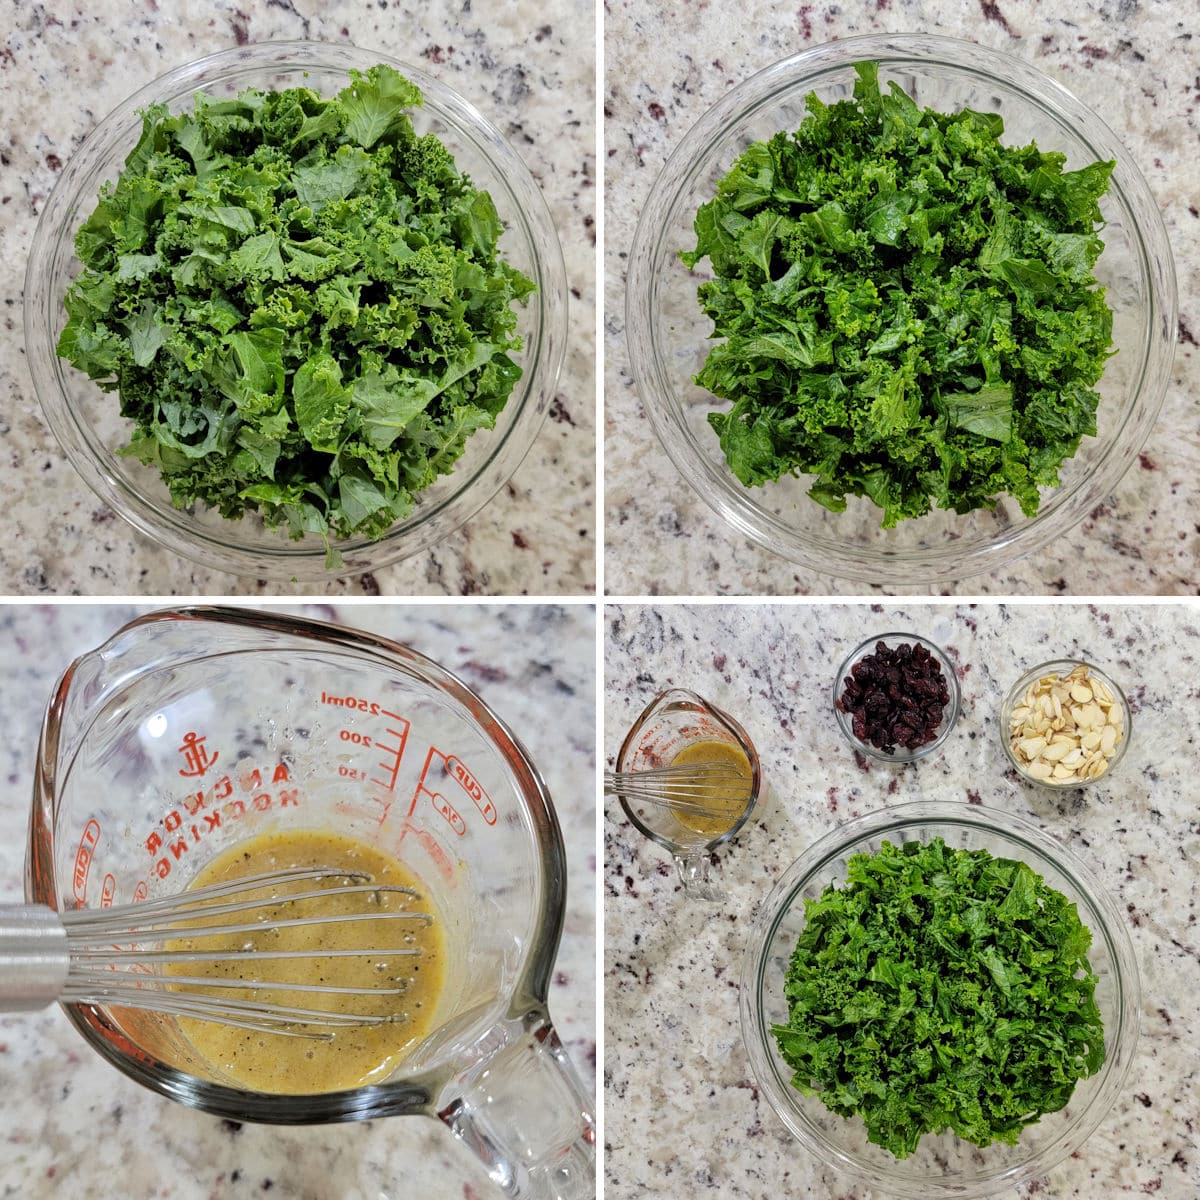 Massaged kale before and after, with salad dressing in a glass bowl.